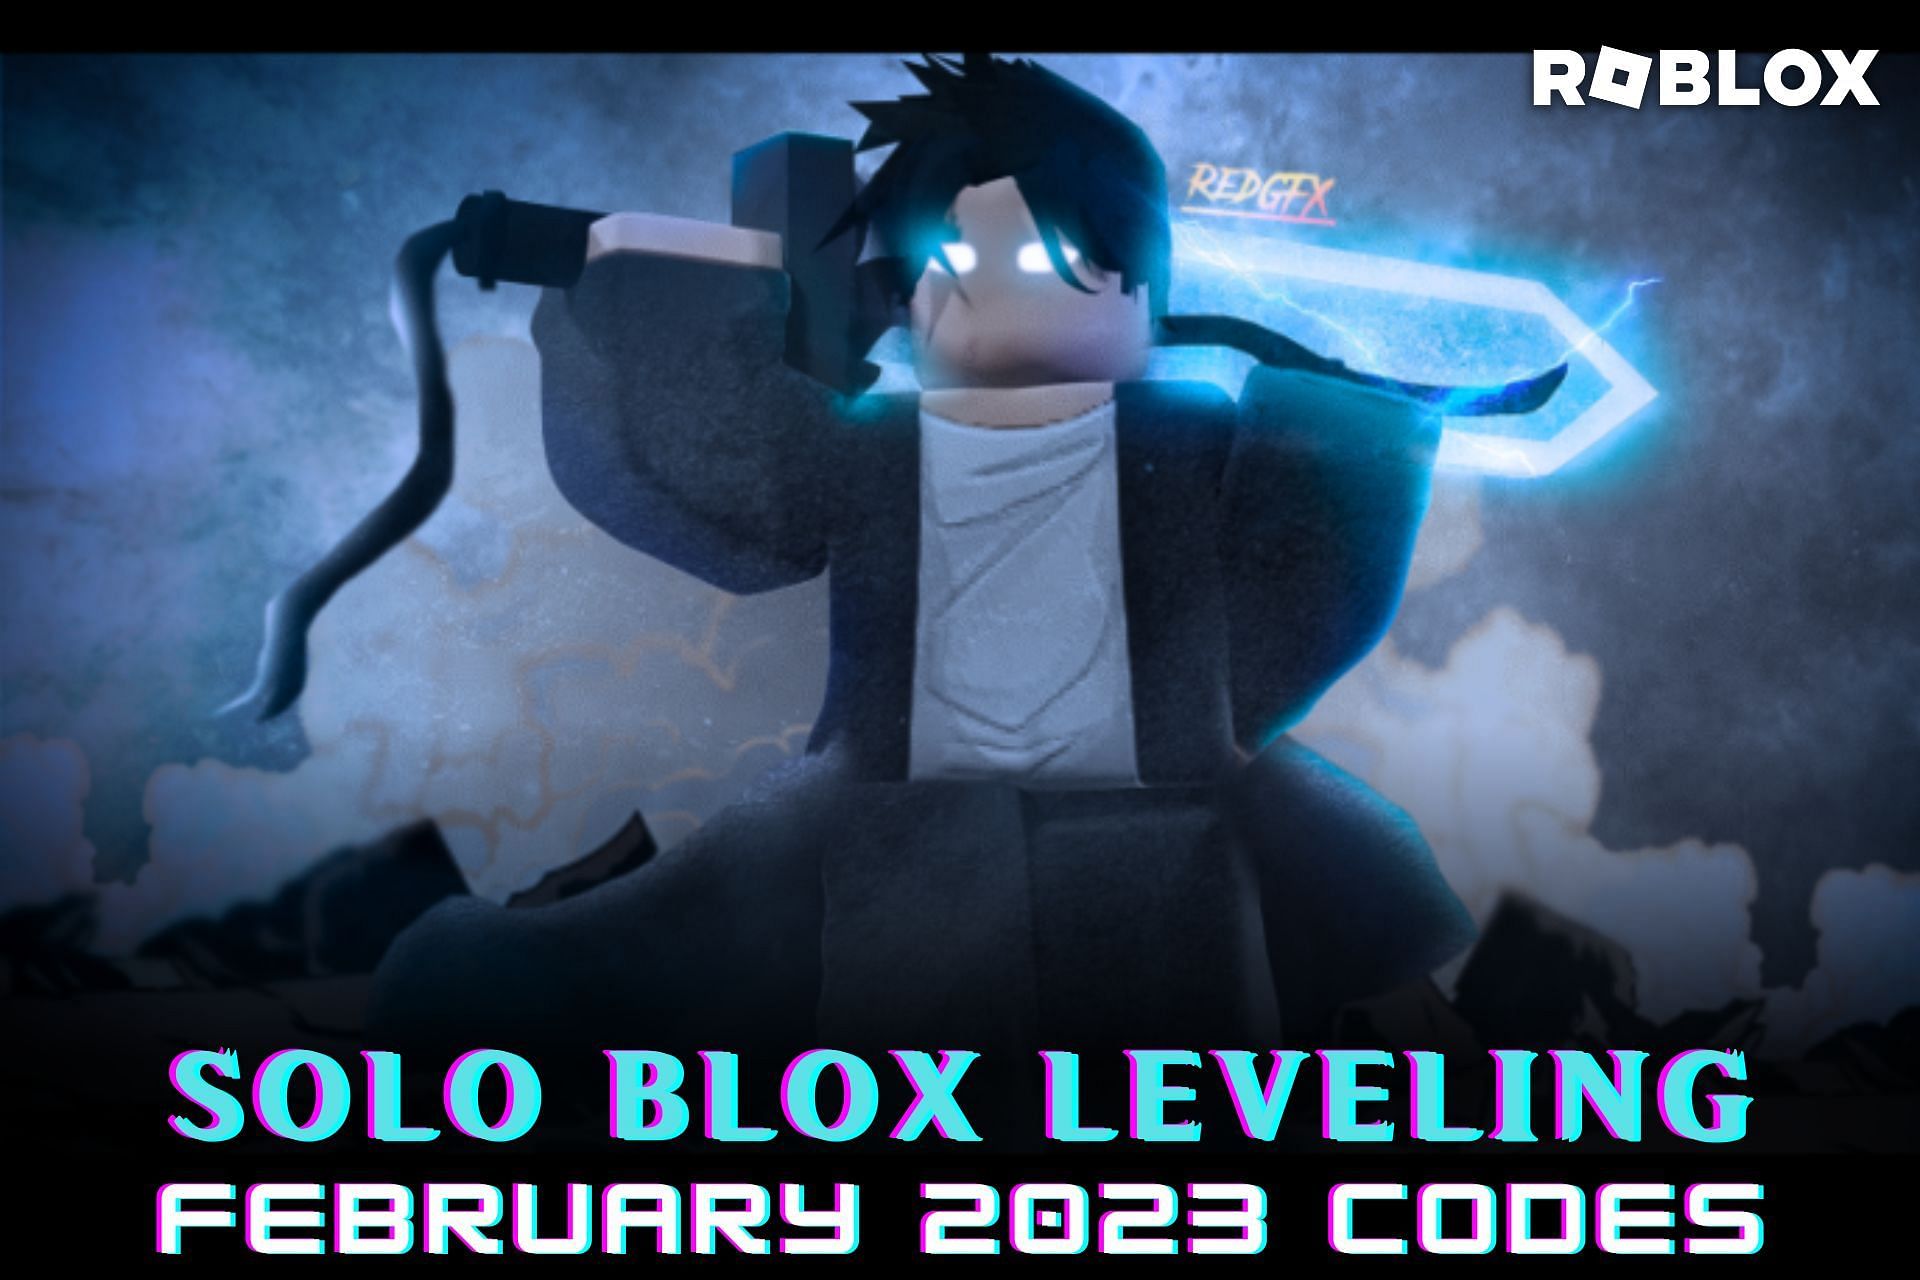 Roblox Solo Blox Leveling Gameplay